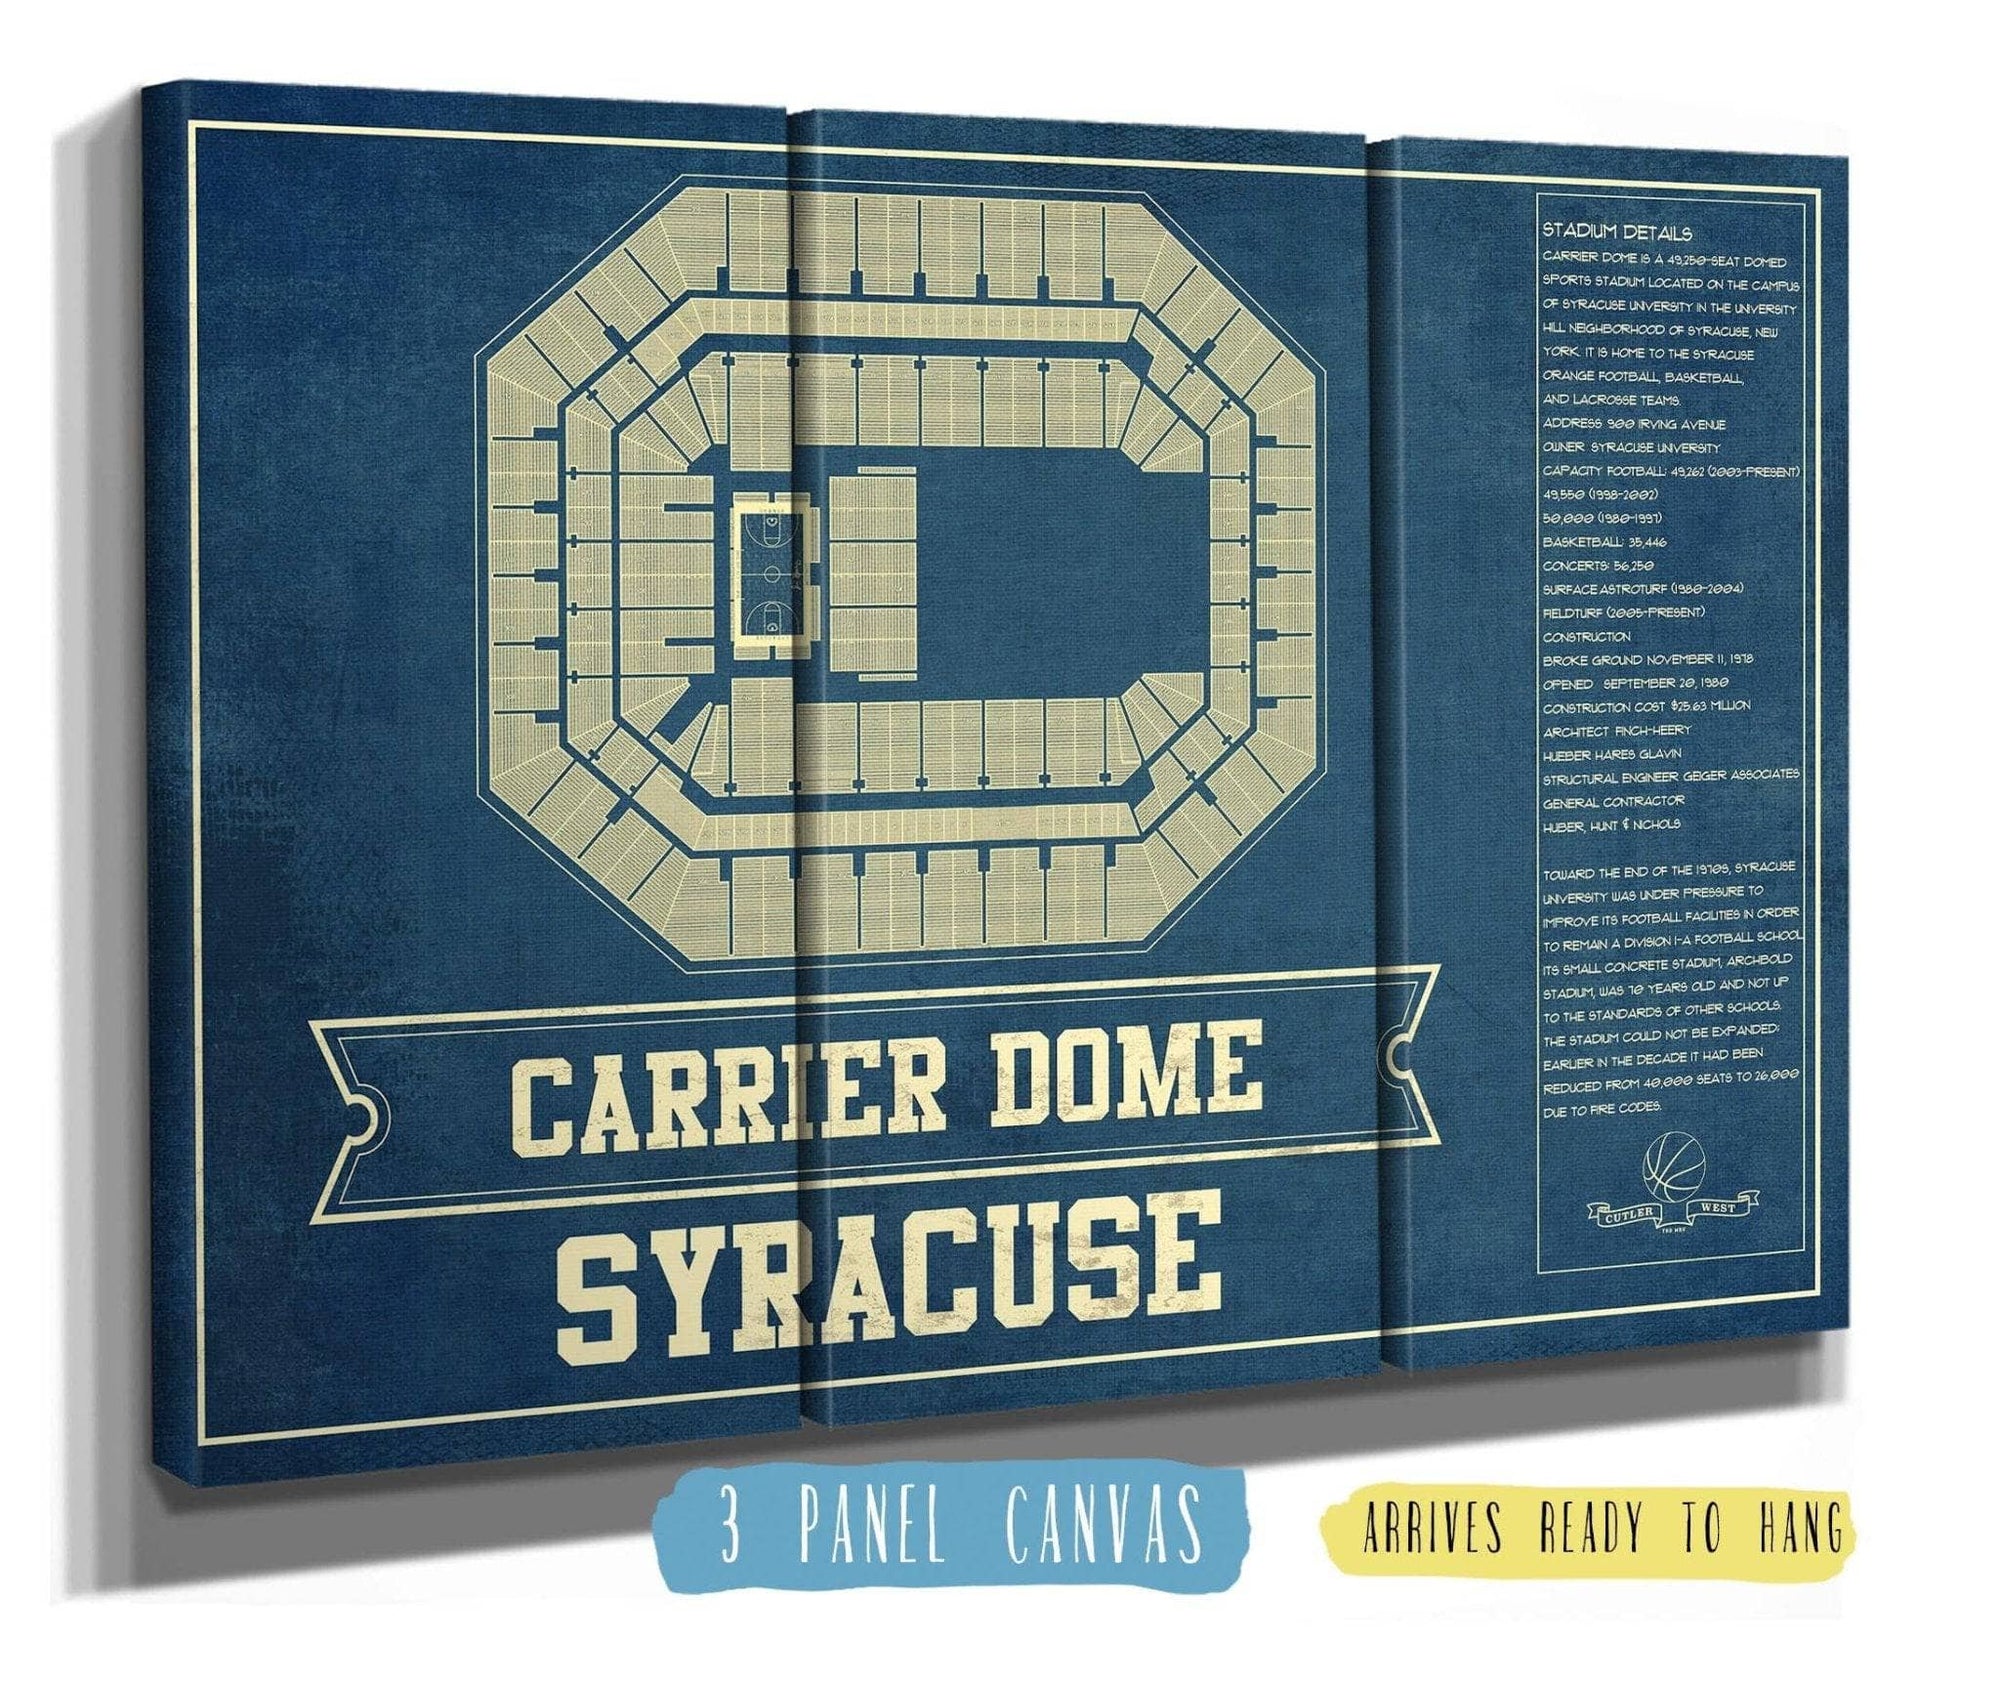 Cutler West Basketball Collection 48" x 32" / 3 Panel Canvas Wrap Syracuse Orange - Carrier Dome Seating Chart - College Basketball Blueprint Art 675915943_82156